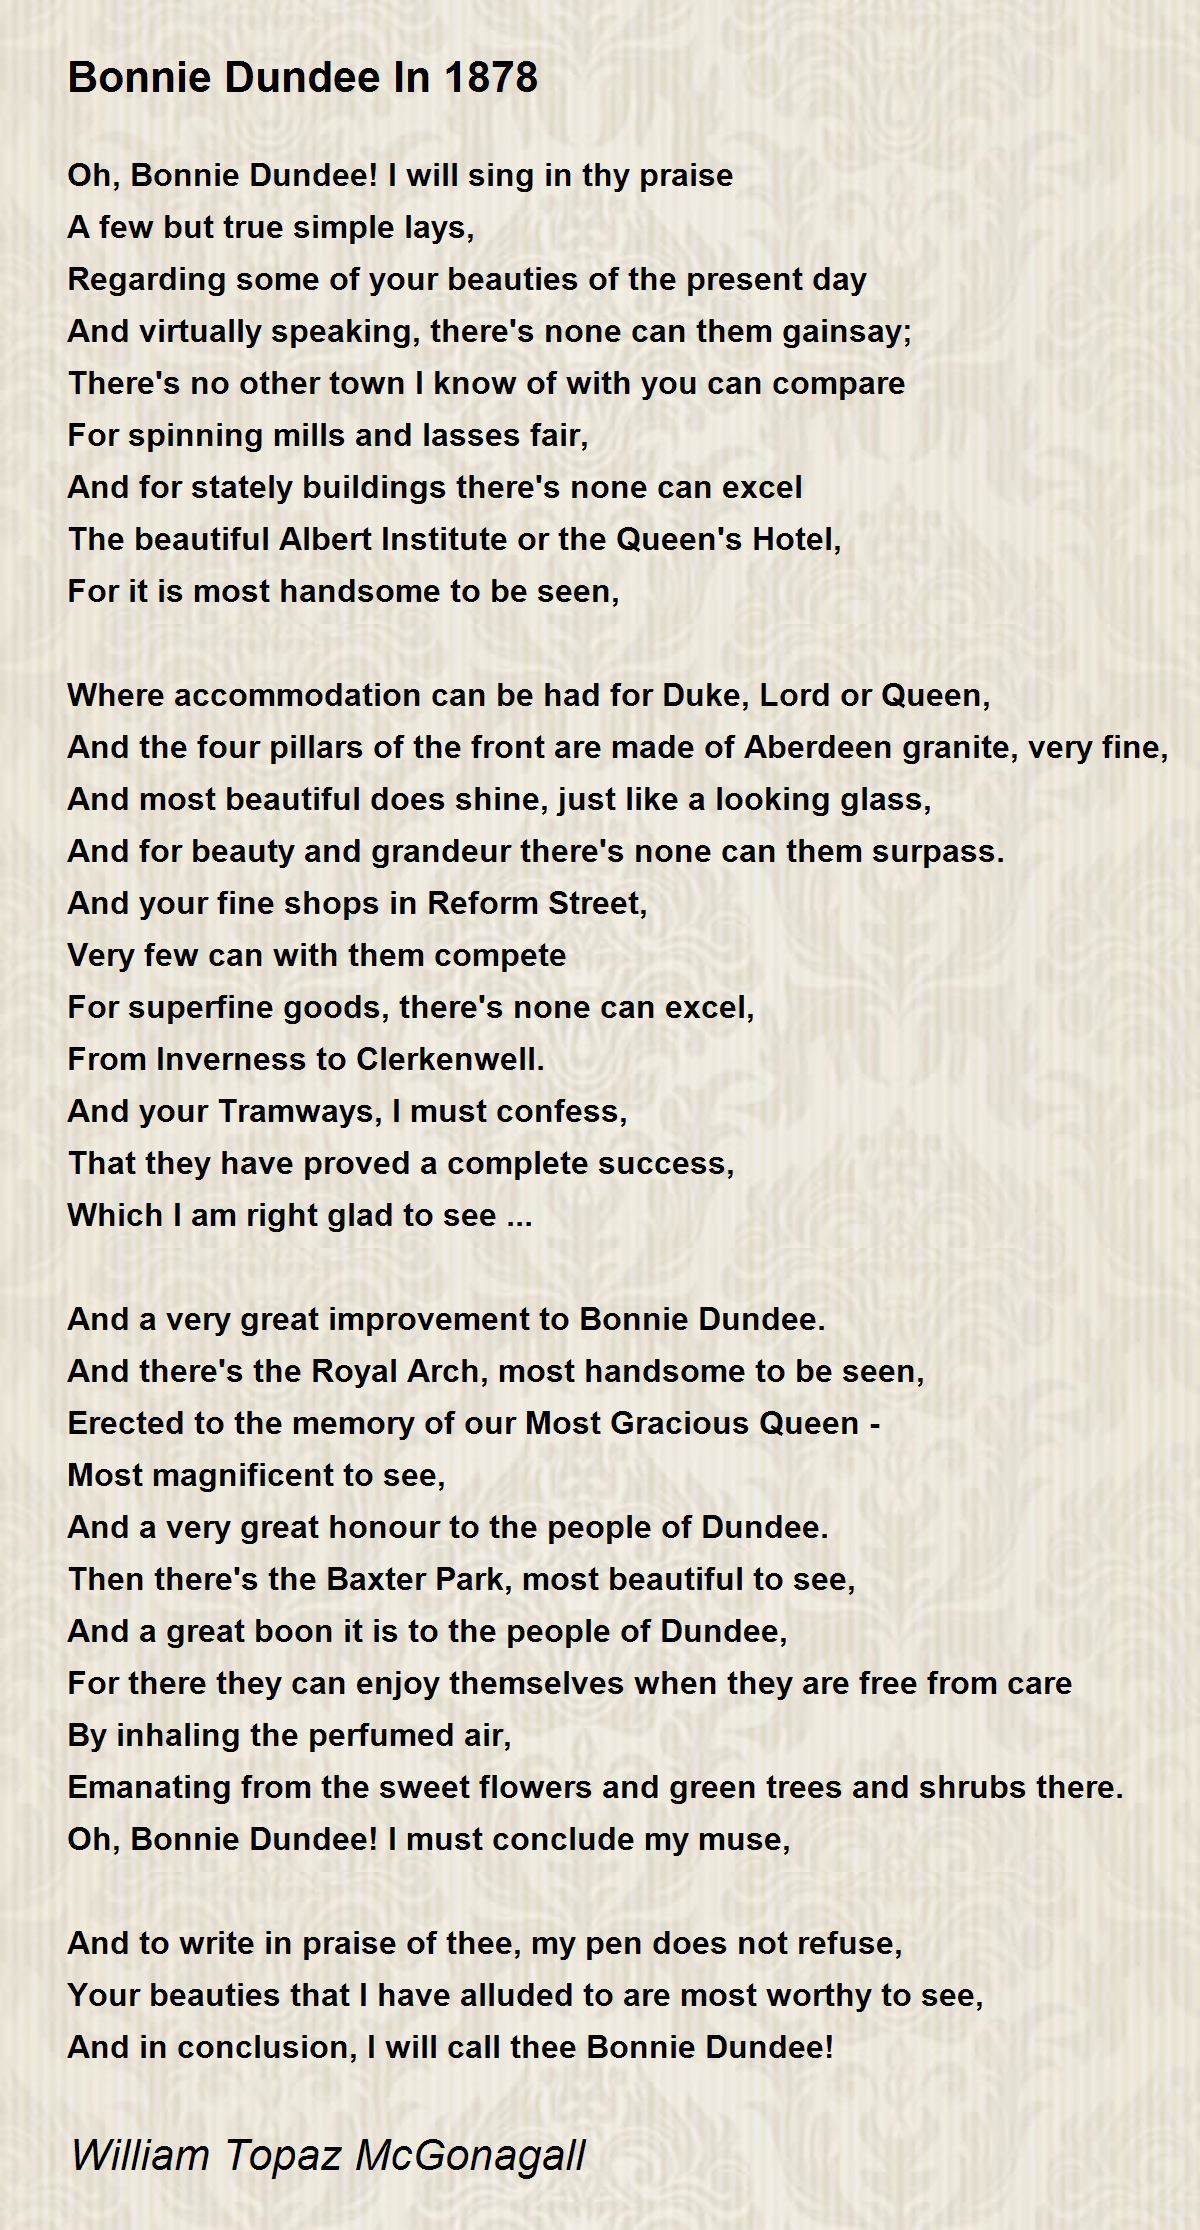 Bonnie Dundee In 1878 - Bonnie Dundee In 1878 Poem by William Topaz ...